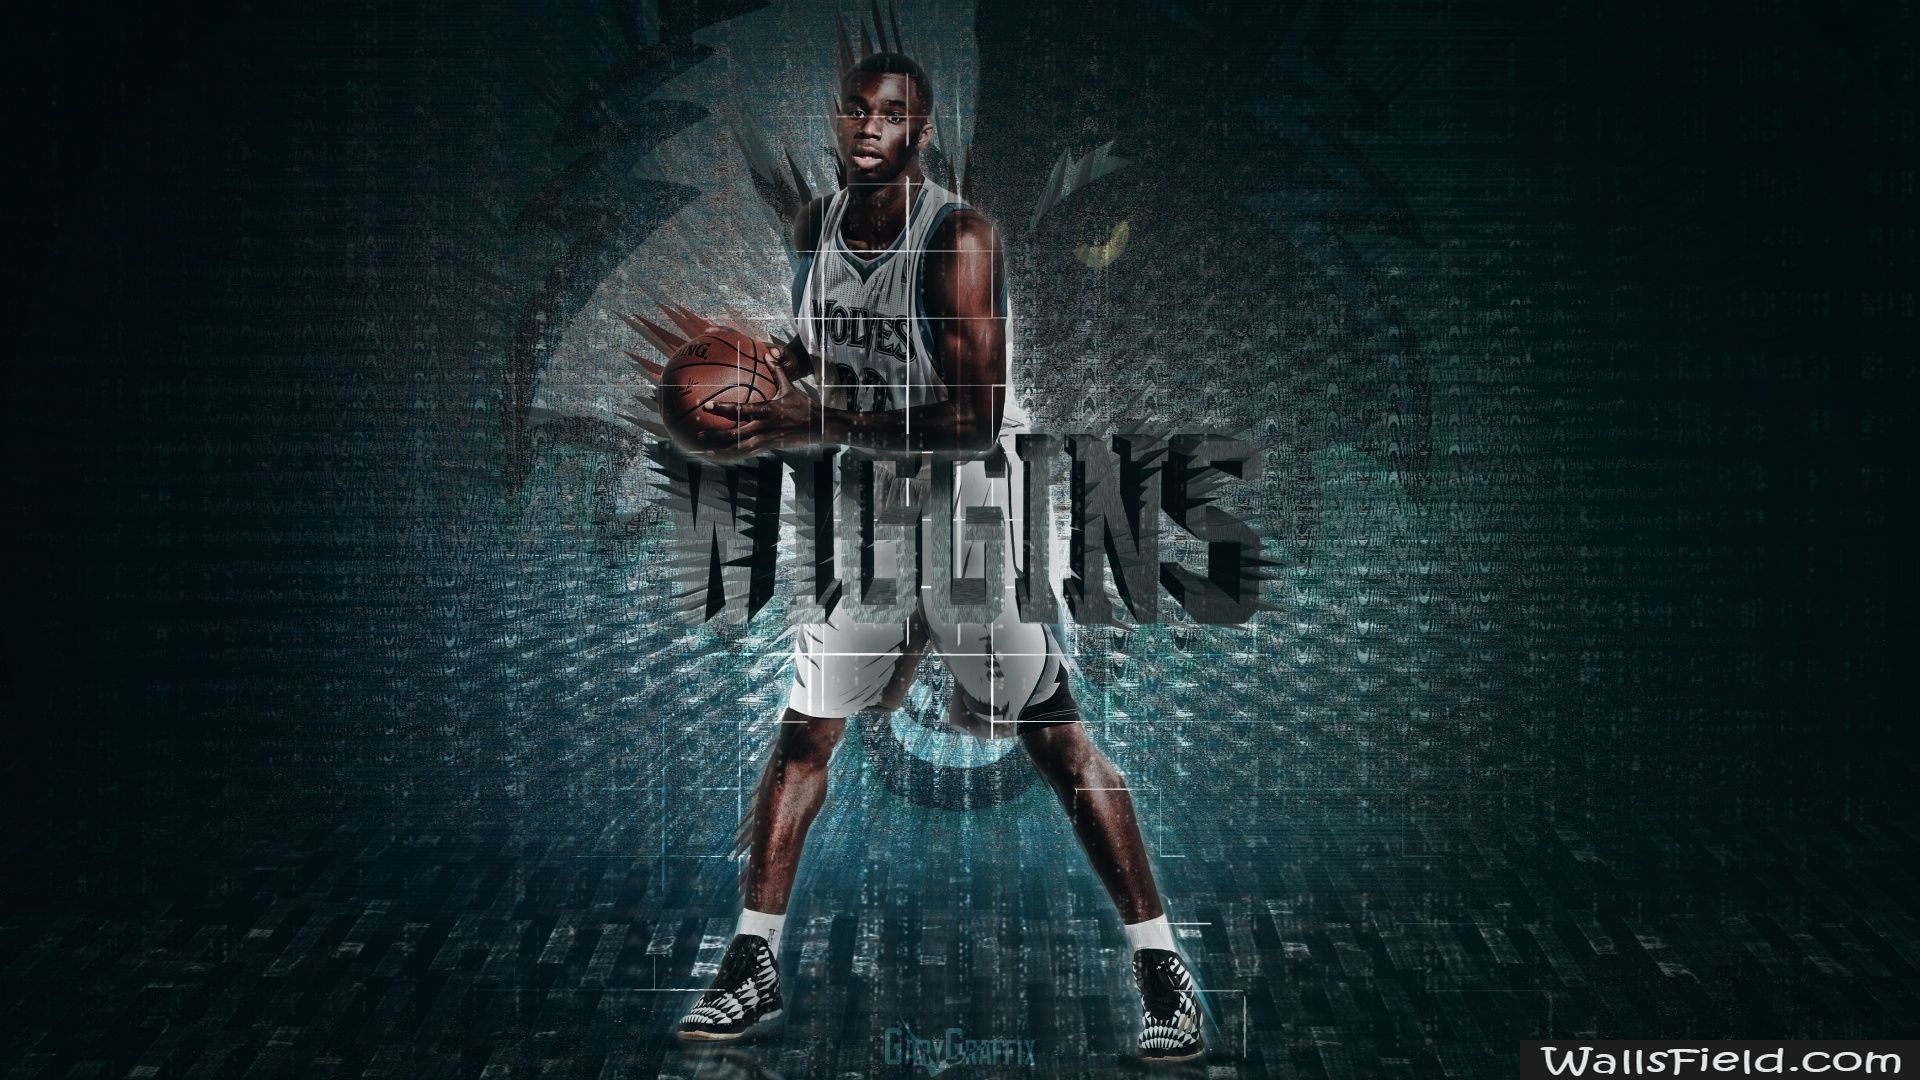 Andrew Wiggins Timberwolves - Wallsfield.com Free HD Backgrounds